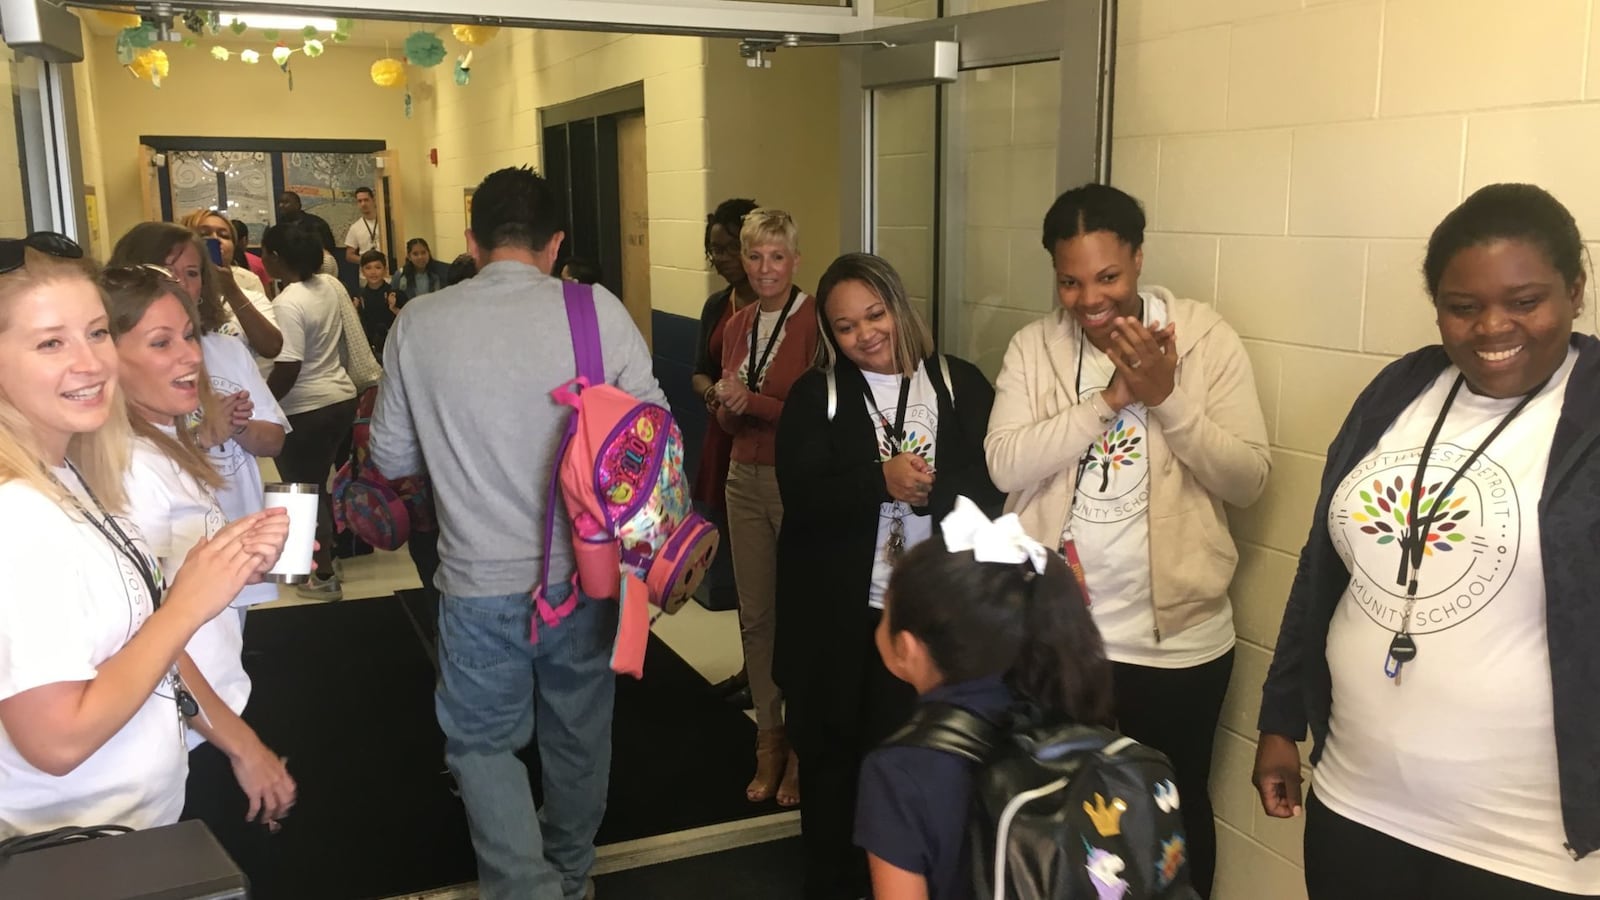 Teachers welcome students to the Southwest Detroit Community School on the first day of school. Seven of the charter's 31 educators last year entered the profession through a fast-track training program.